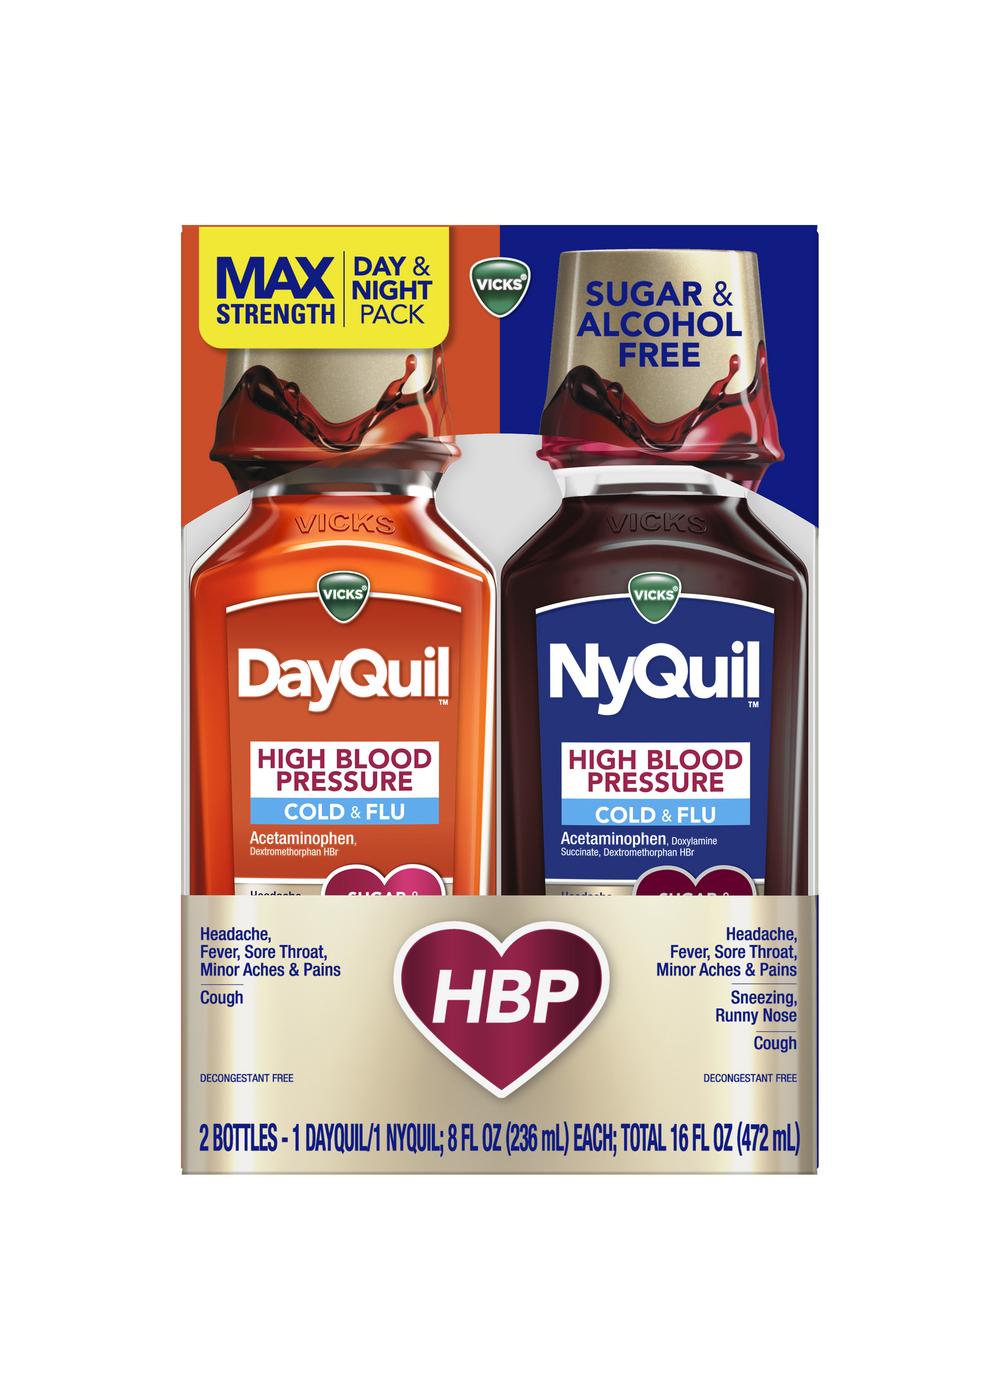 Vicks Dayquil + Nyquil High Blood Pressure Cold & Flu Liquid - Combo Pack; image 1 of 2